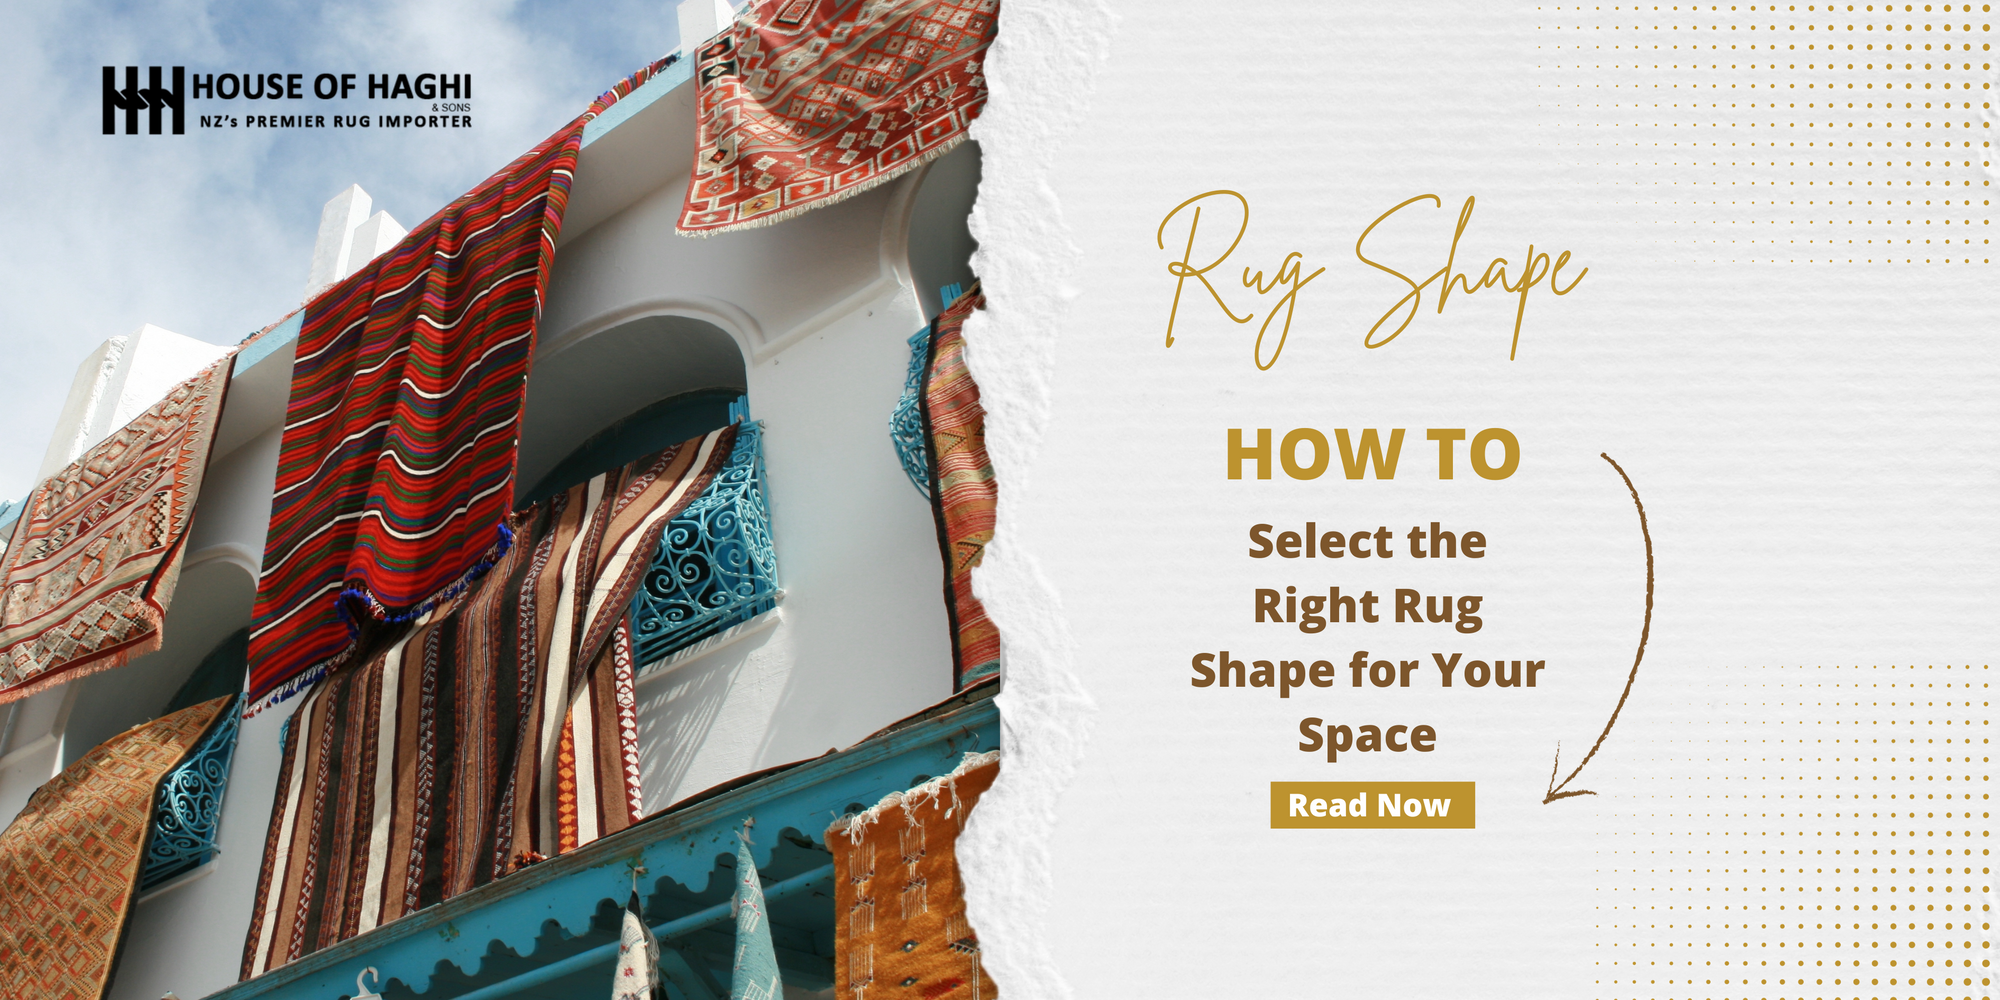 How to Select the Right Rug Shape for Your Space